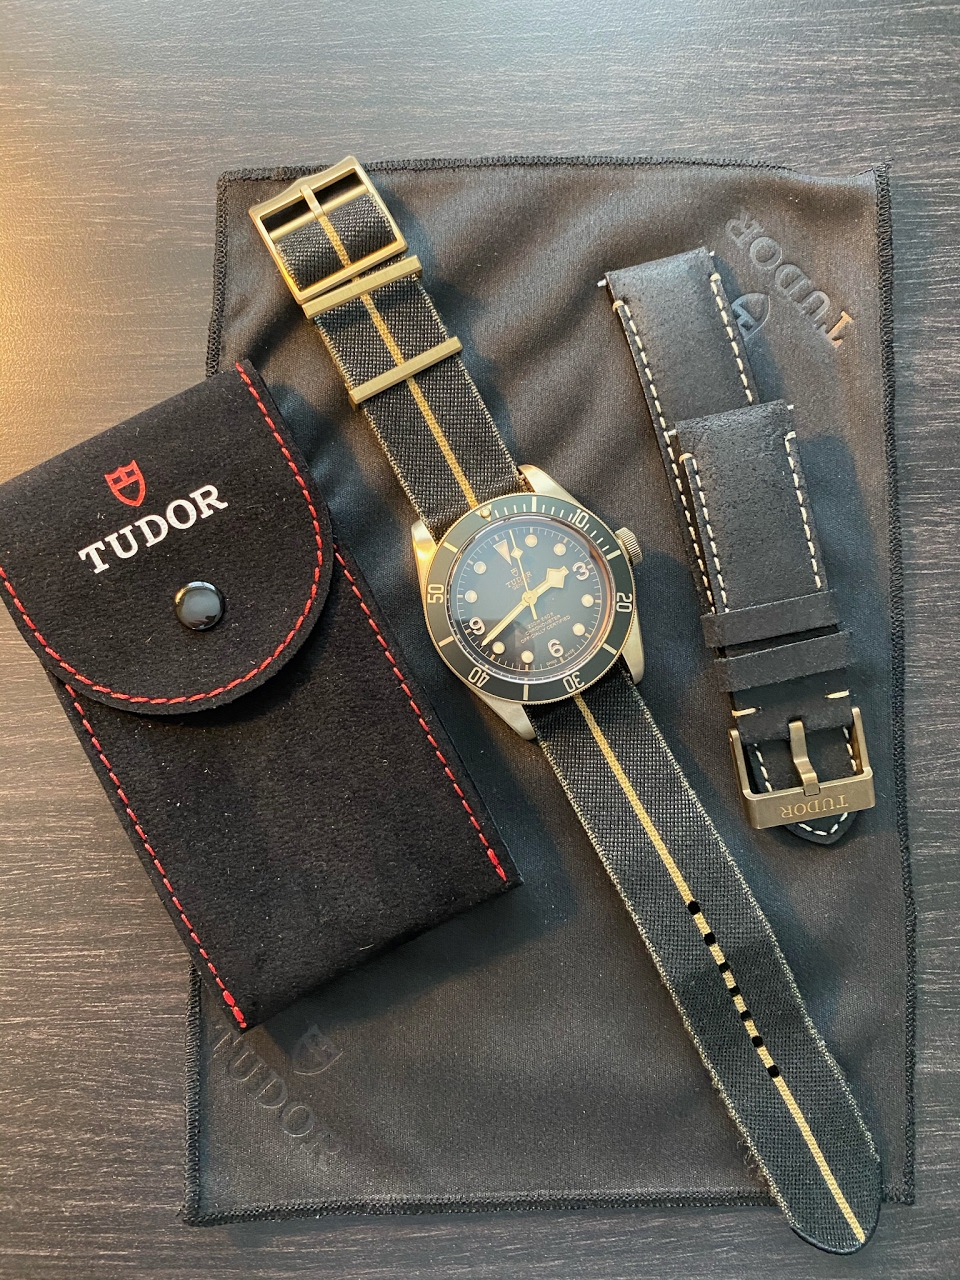 Rolex - My Tudor is back from service 